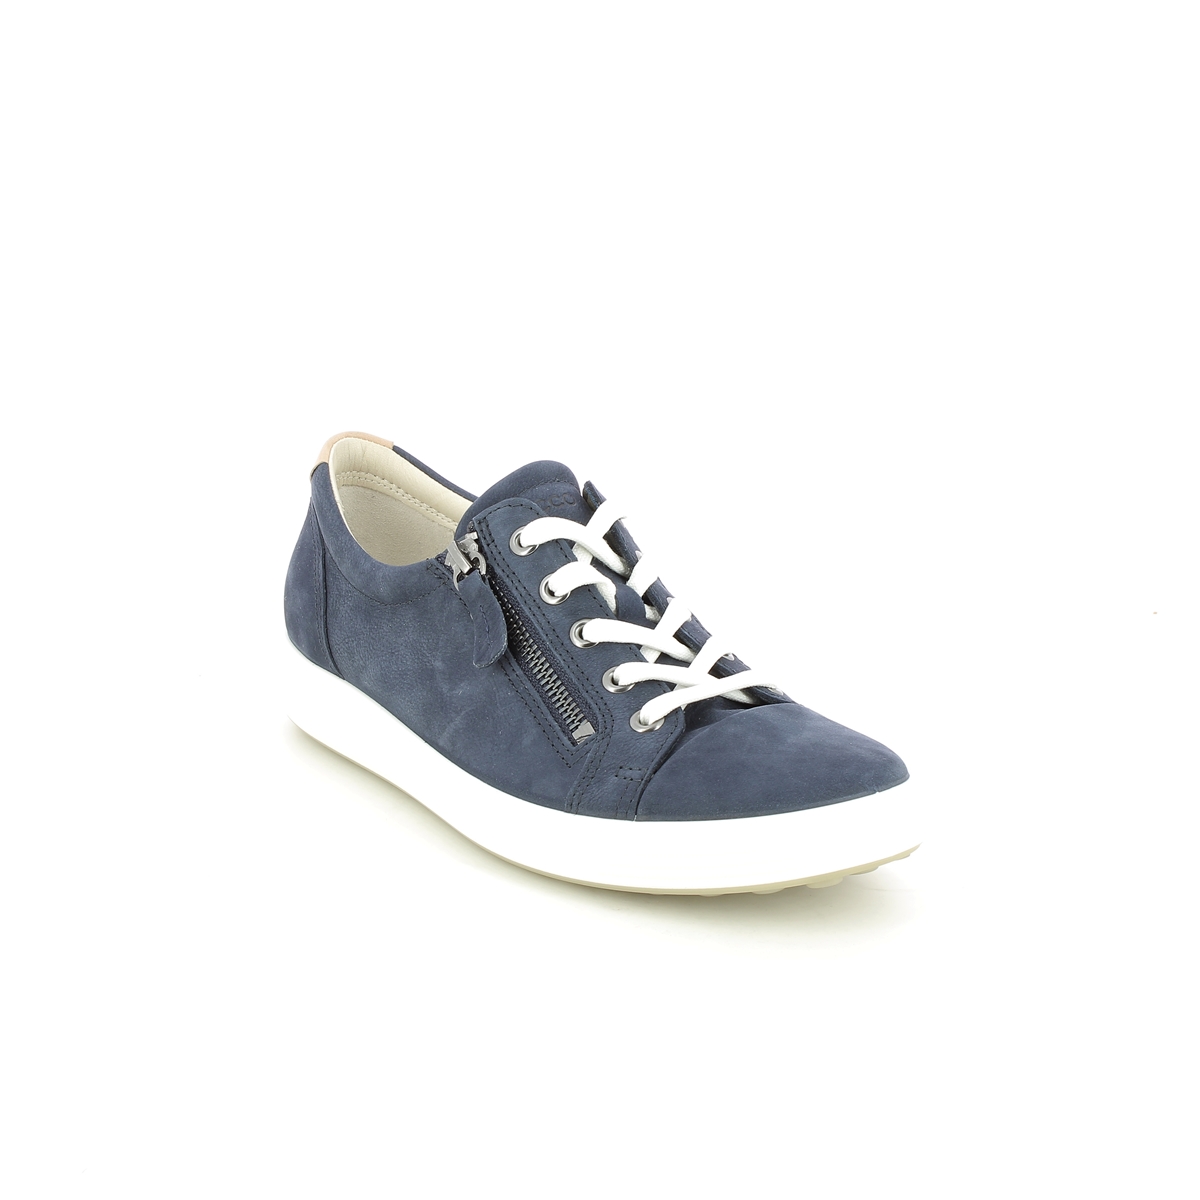 Ecco Soft 7 Lace Zip Navy Nubuck Womens Trainers 430853-02303 In Size 37 In Plain Navy Nubuck